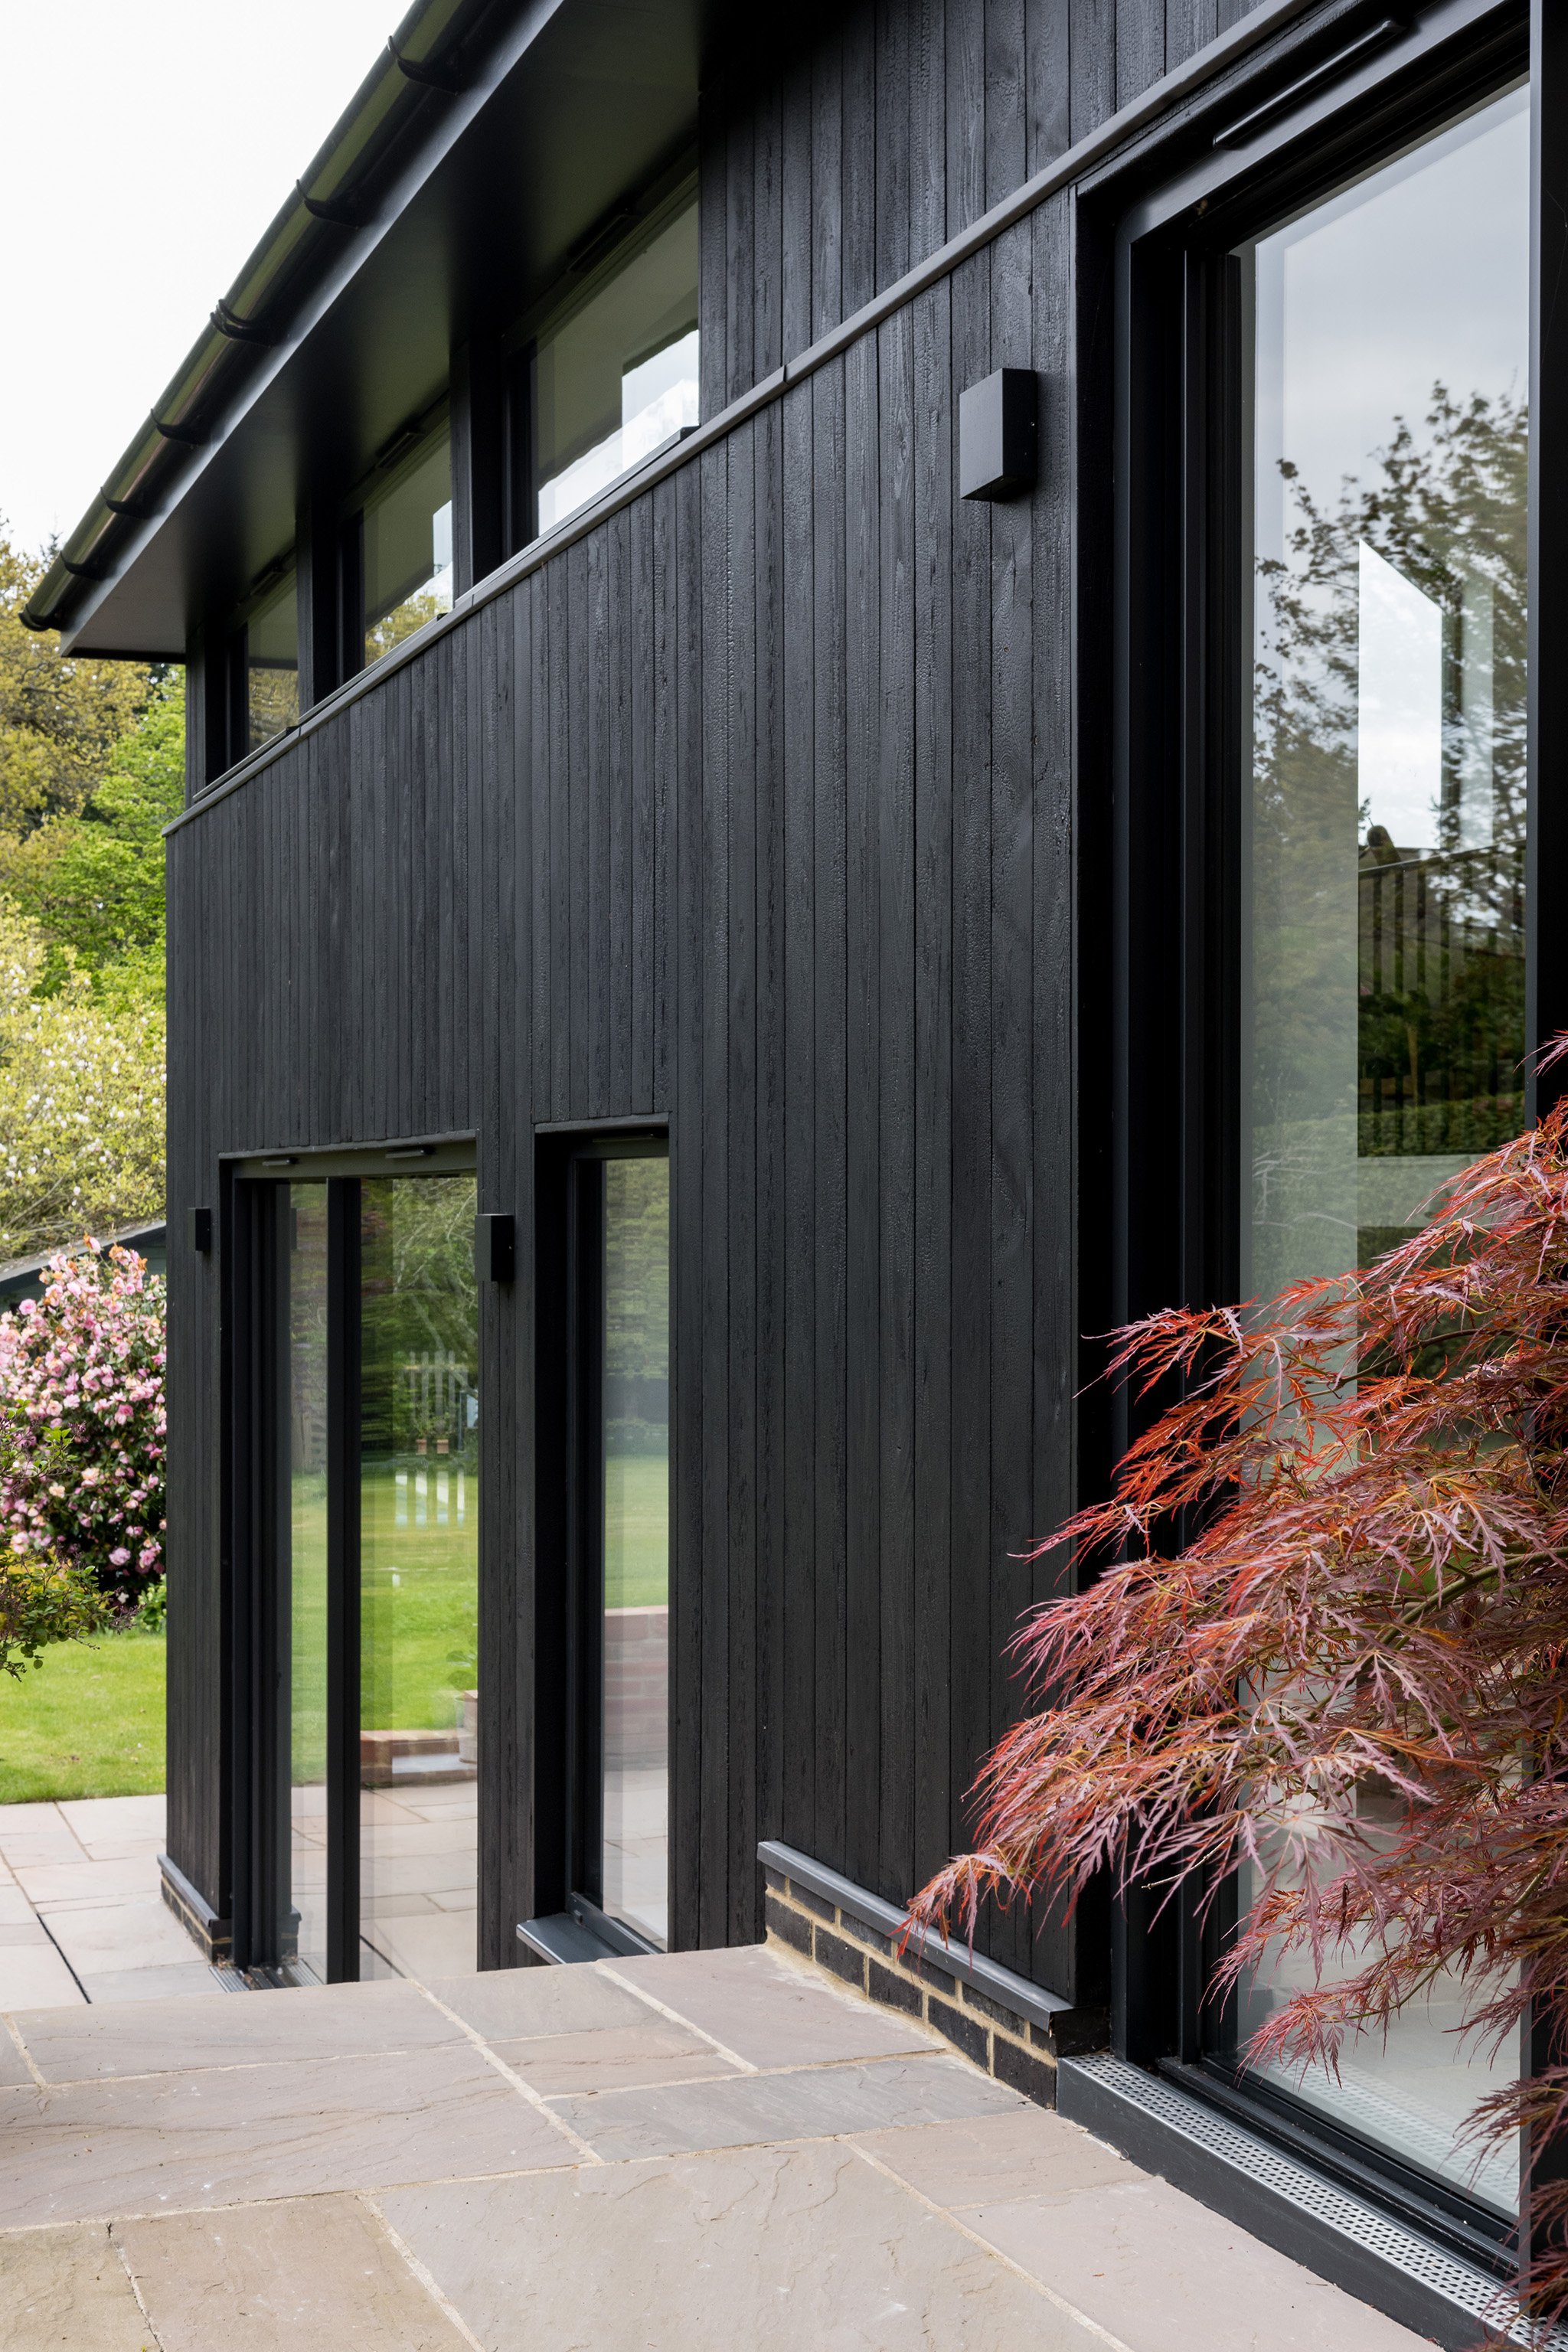 7-The-Pippins-Charred-Timber-House-Extension-Exterior-Architecture-London-Buckinghamshire-UK-Rider-Stirland-Architects.JPG